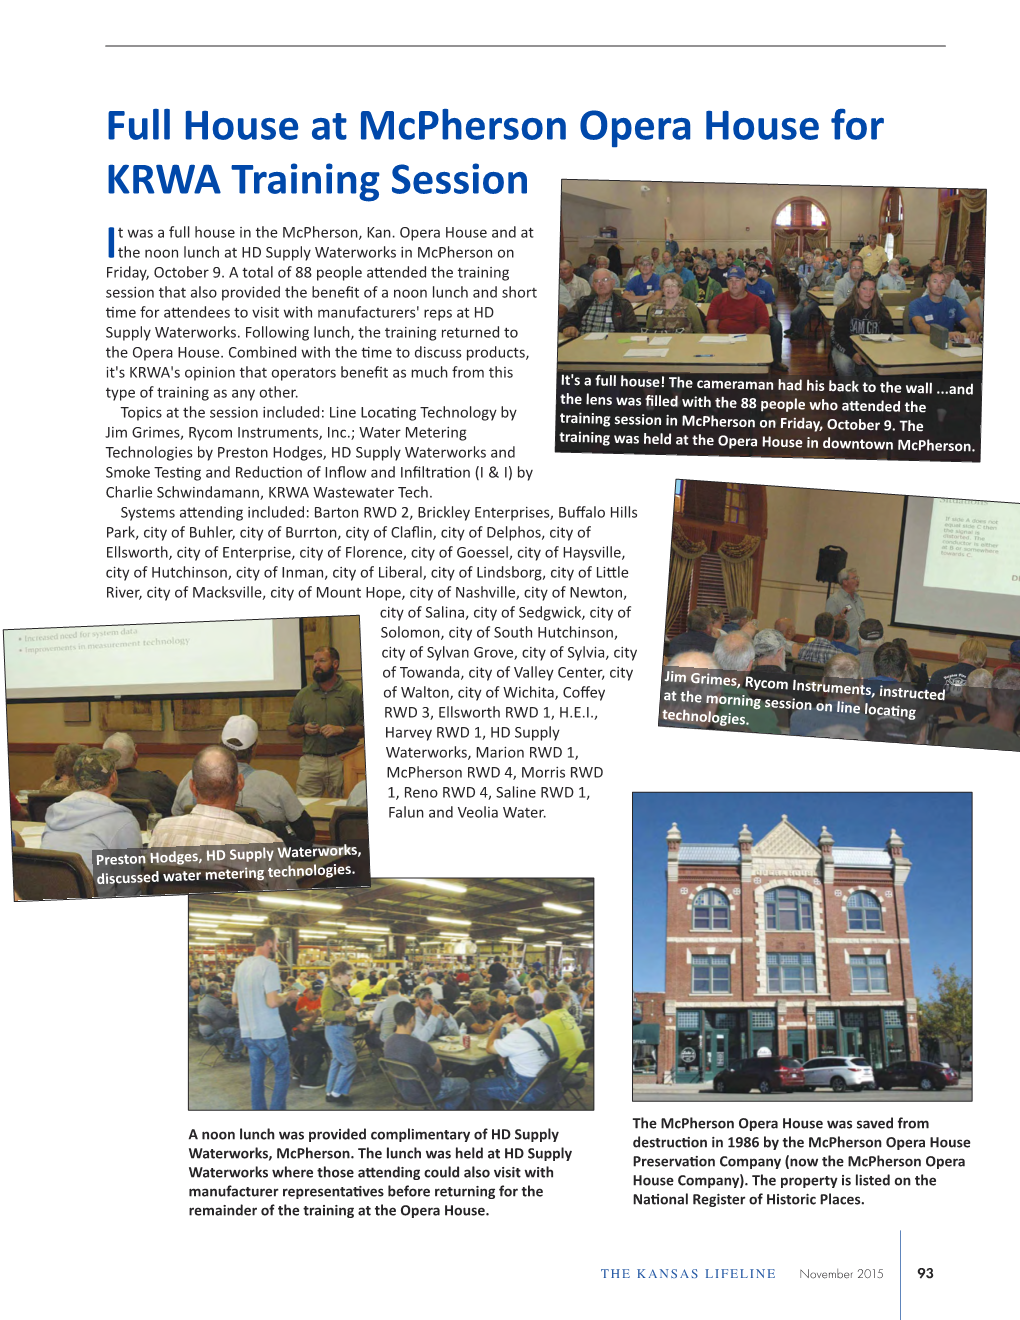 Full House at Mcpherson Opera House for KRWA Training Session